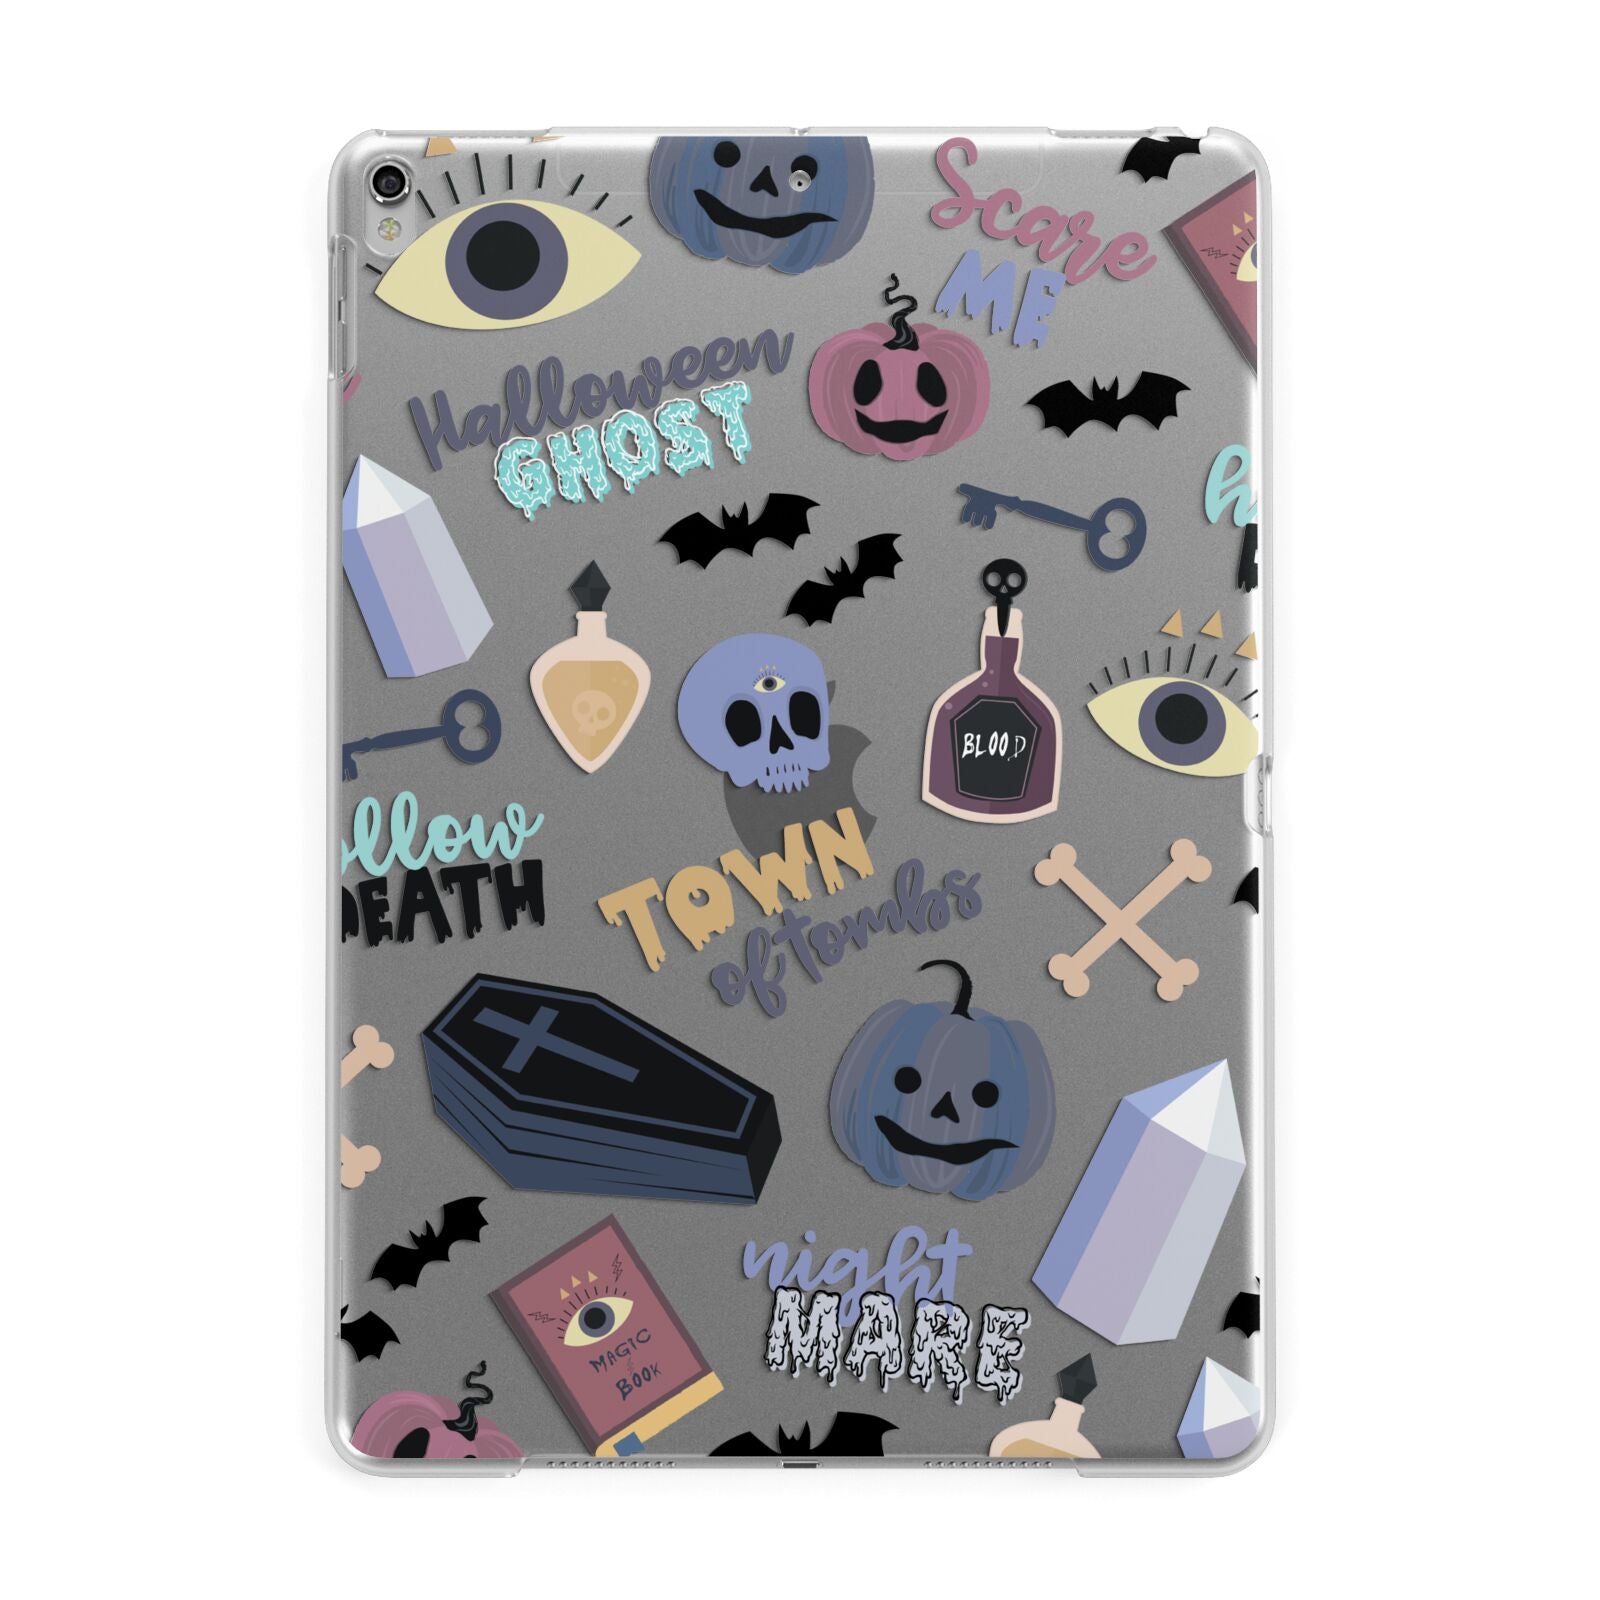 Spooky Blue Illustrations and Catchphrases Apple iPad Silver Case